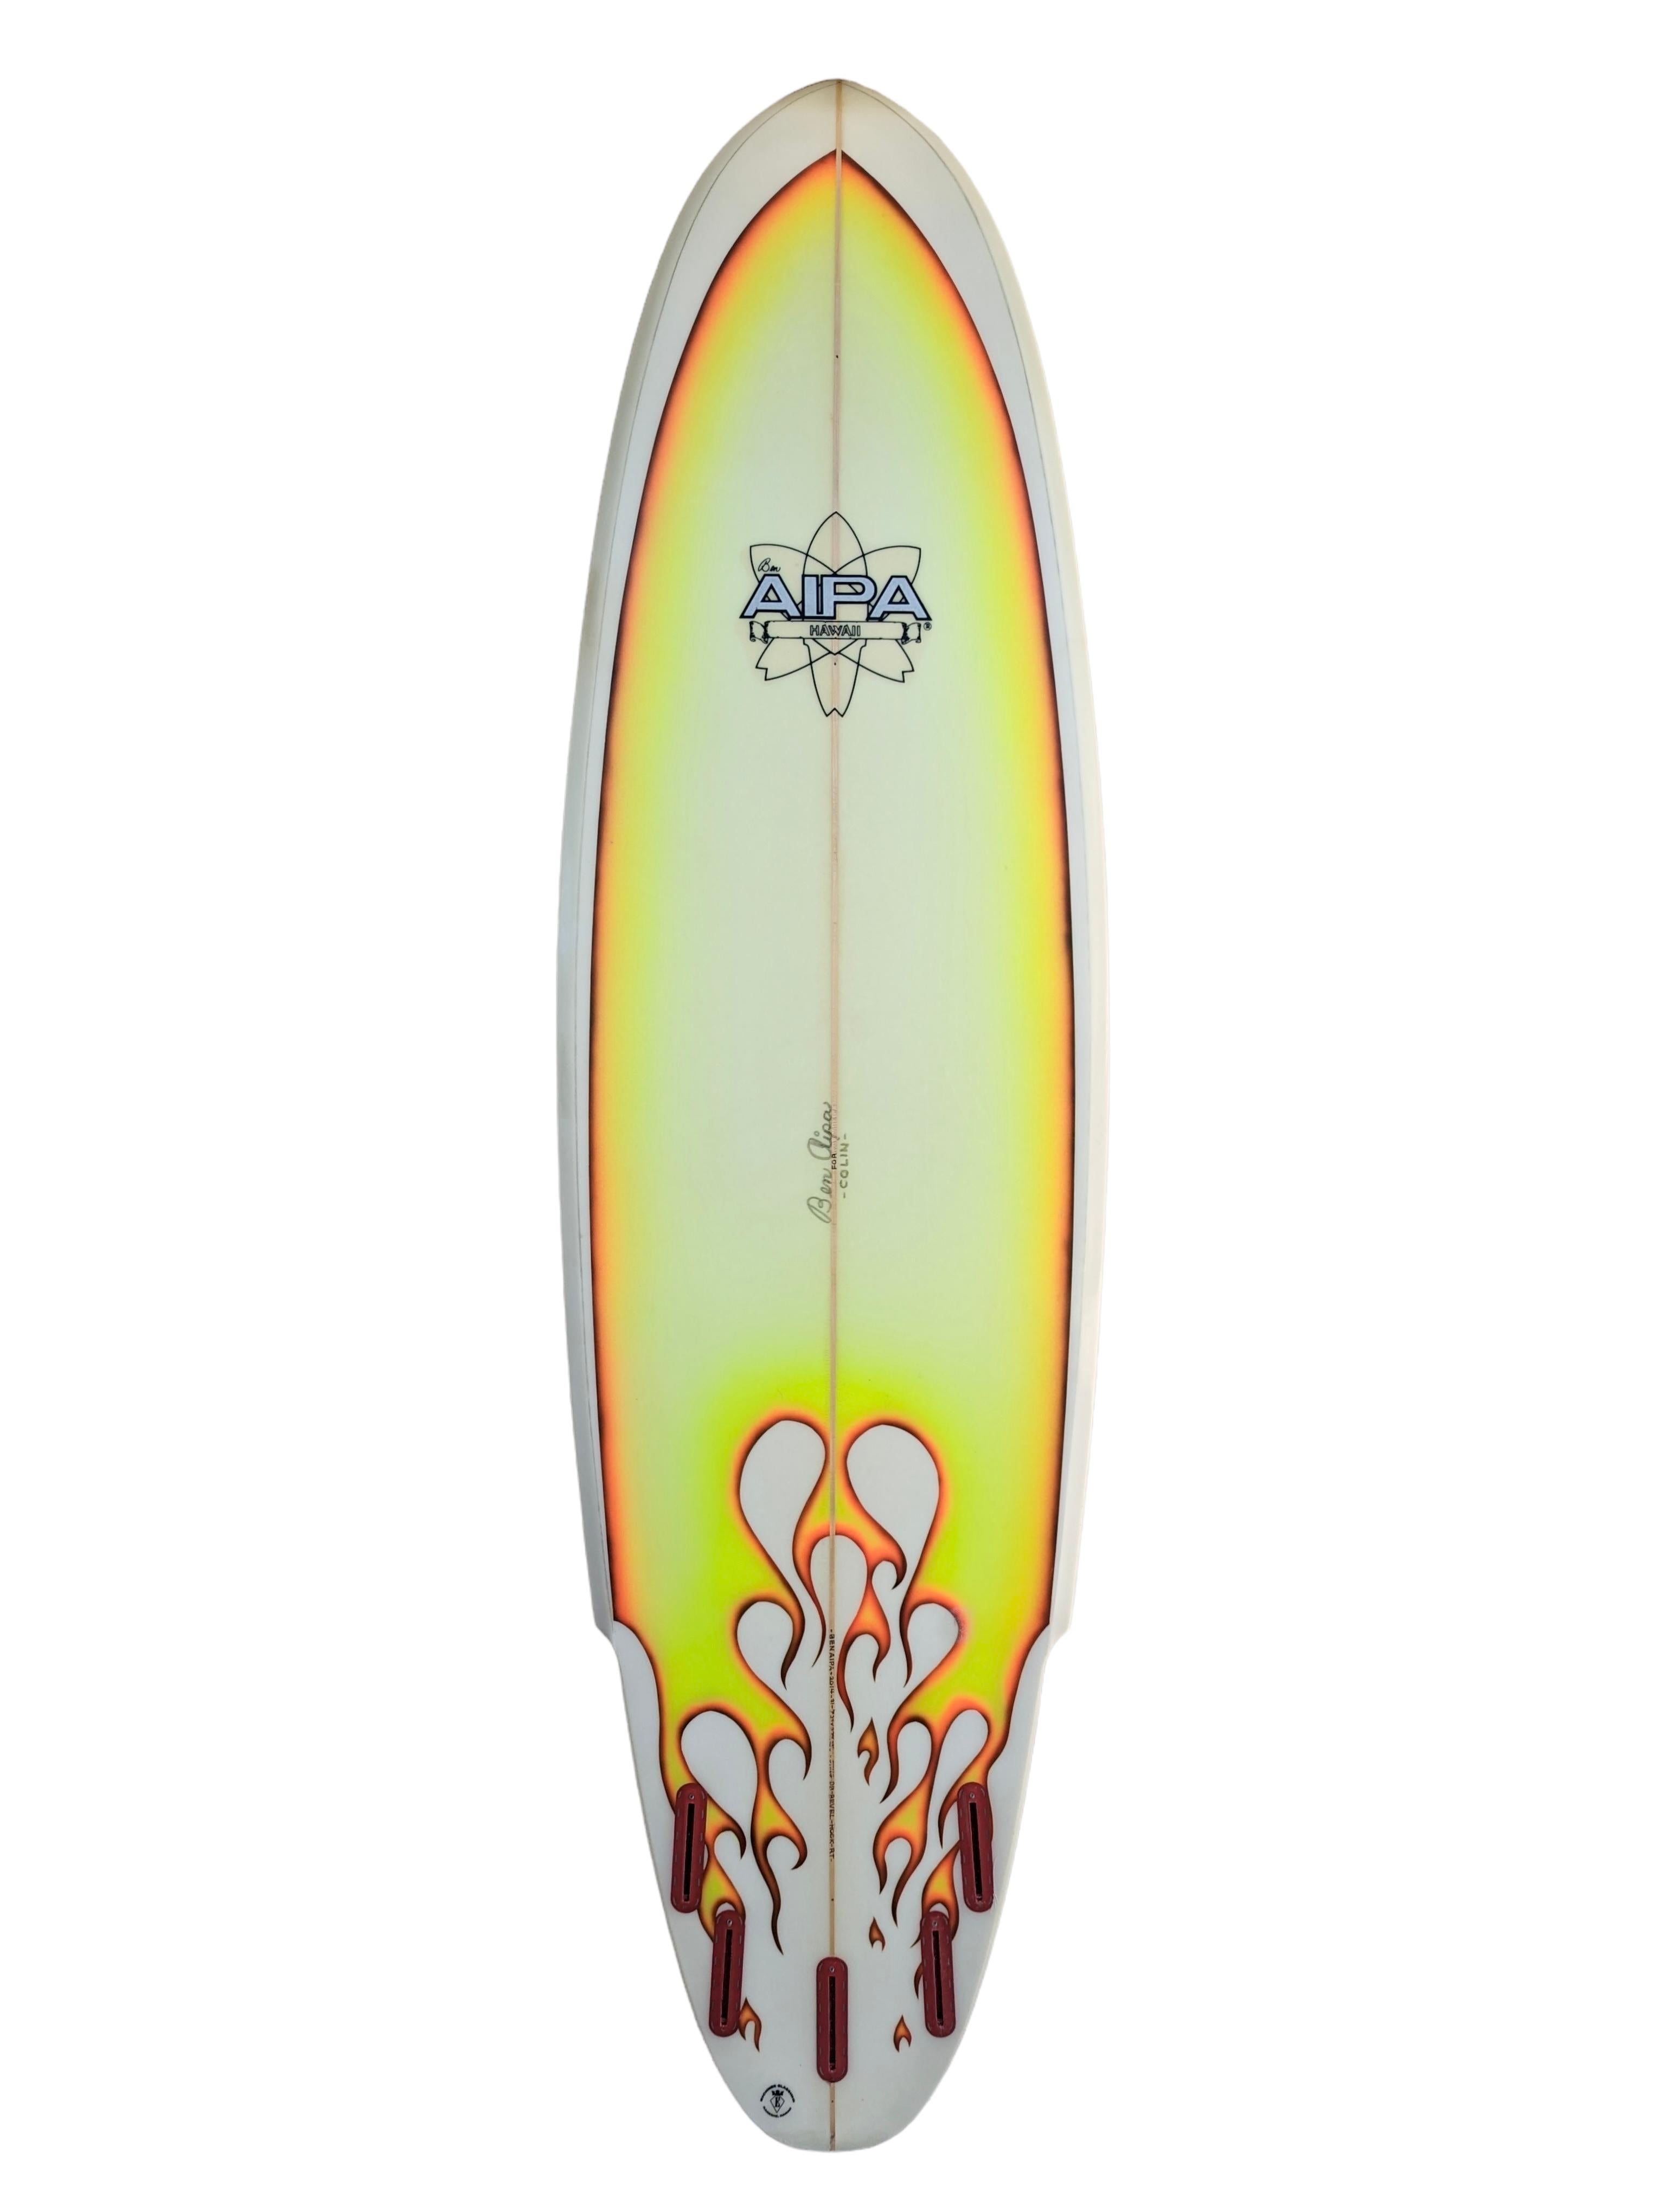 Collectible Aipa Hawaii Sting surfboard shaped by the late Ben Aipa (1942-2021). Features the famous ‘Sting’ winged surfboard design which Aipa invented. Airbrushed work of art featuring flames top/bottom. 5 fin boxes allowing for both quad fin and